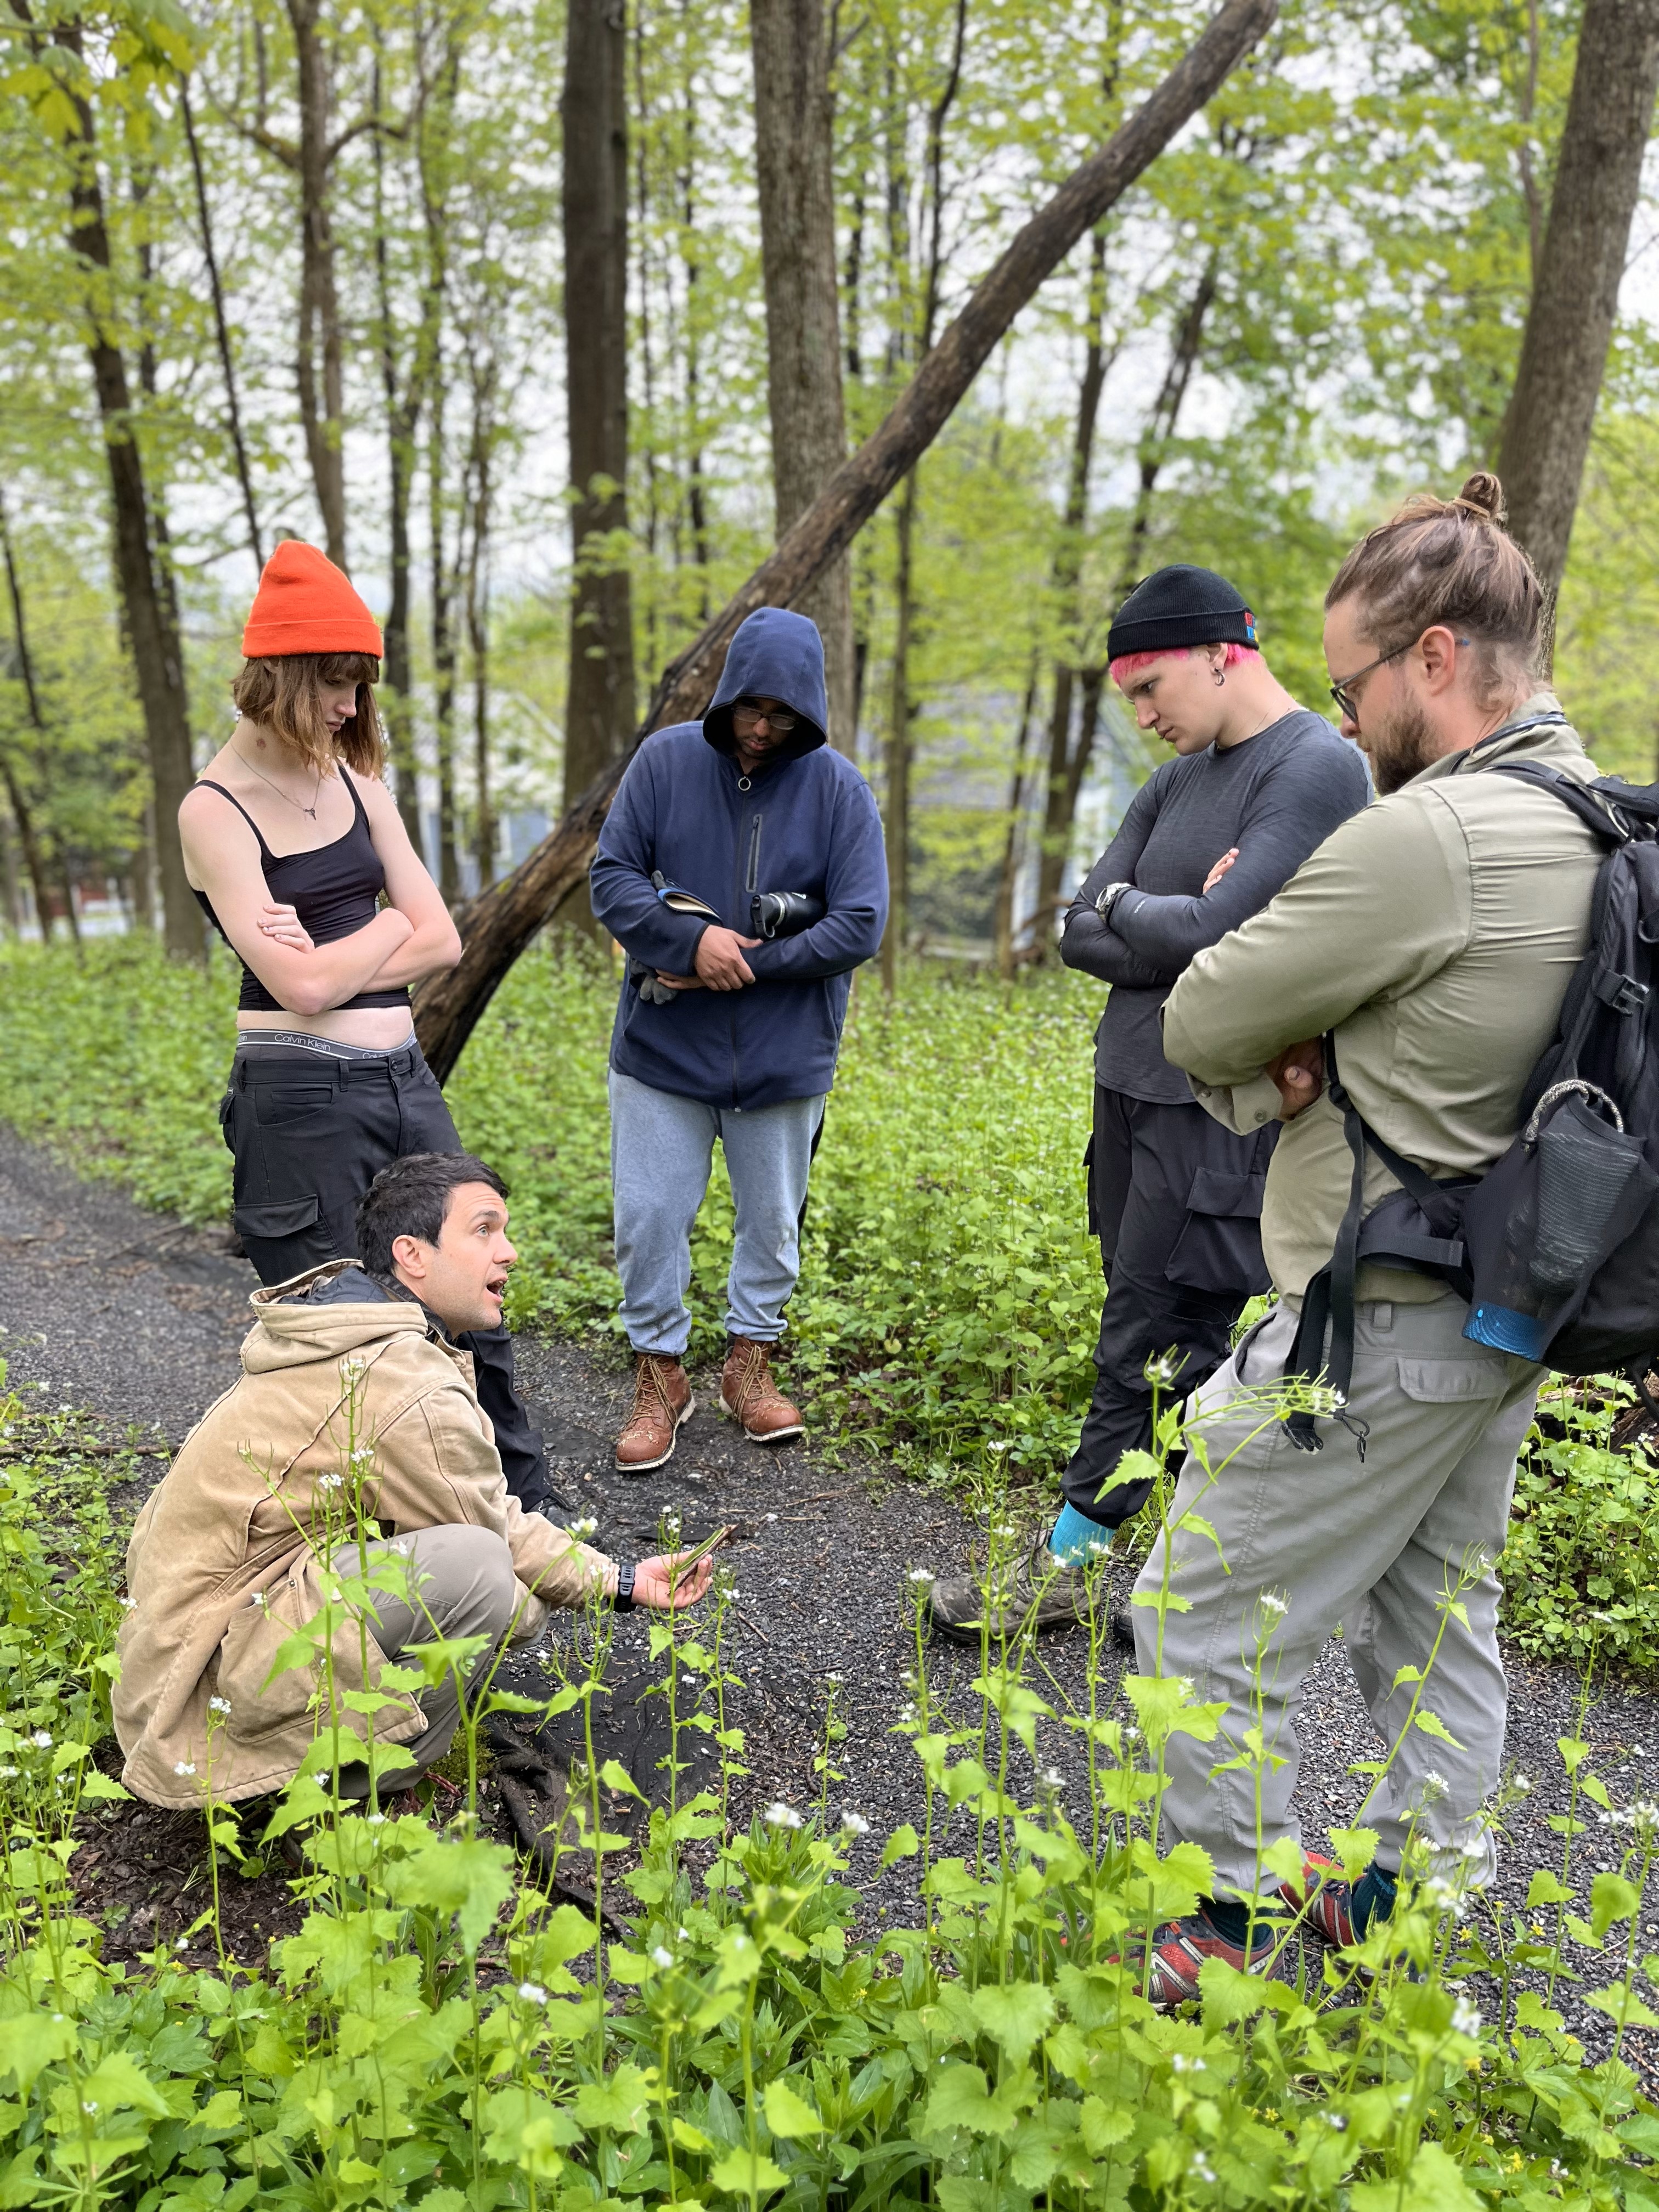 Each year Great Barrington Land Conservancy hires Greenagers Trails cre